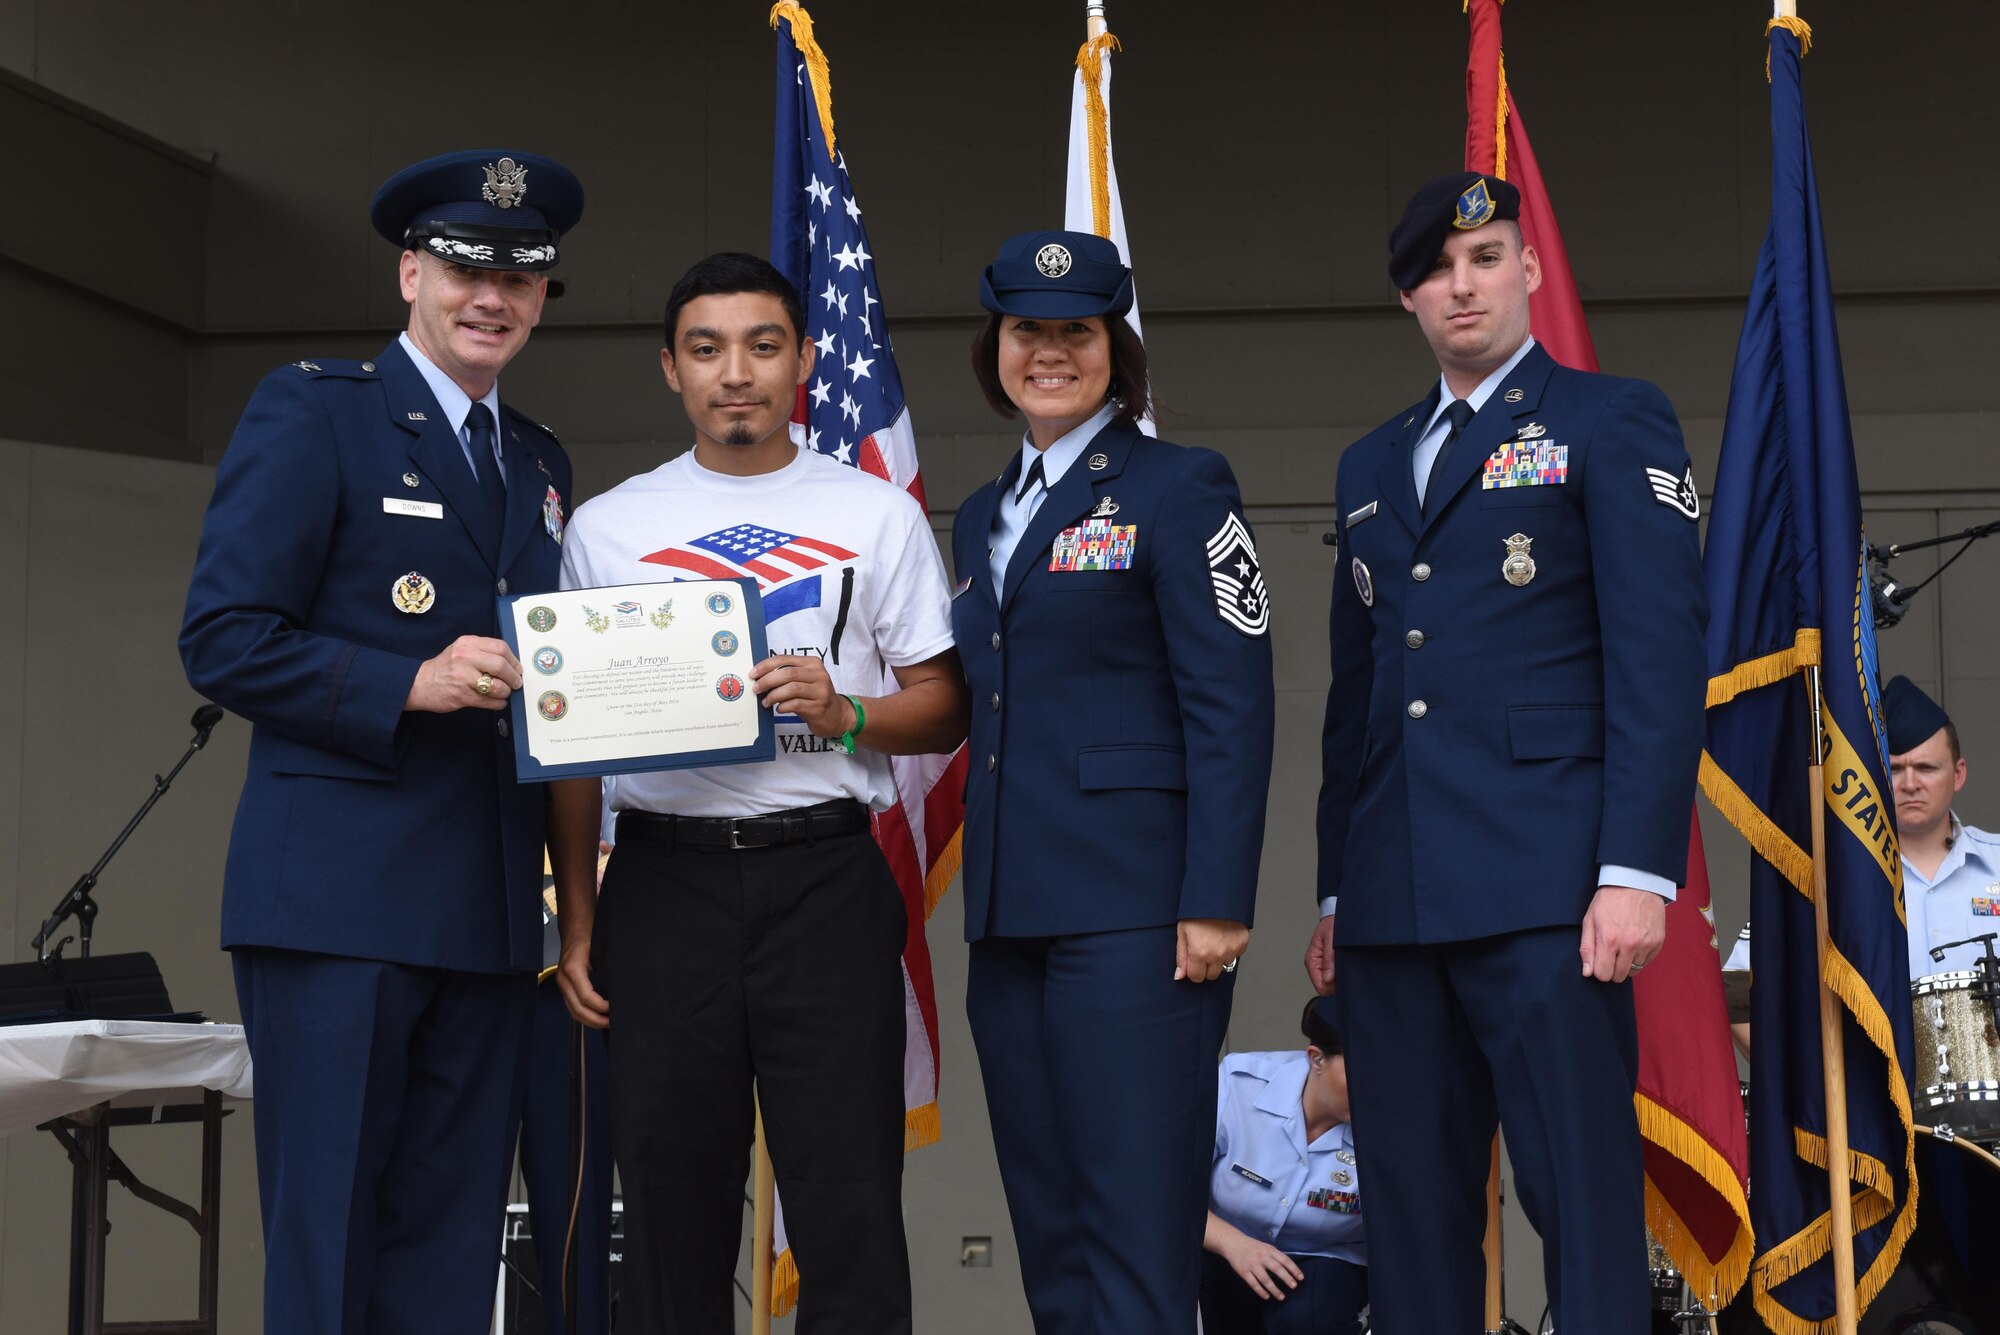 U.S. Air Force Col. Michael Downs, 17th Training Wing Commander, presents a certificate to Juan Arroyo, high school student, for choosing to enlist in the Air Force, at the RiverStage in San Angelo, Texas, May 21, 2016. (U.S. Air Force photo by Airman 1st Class Chase Sousa/Released)